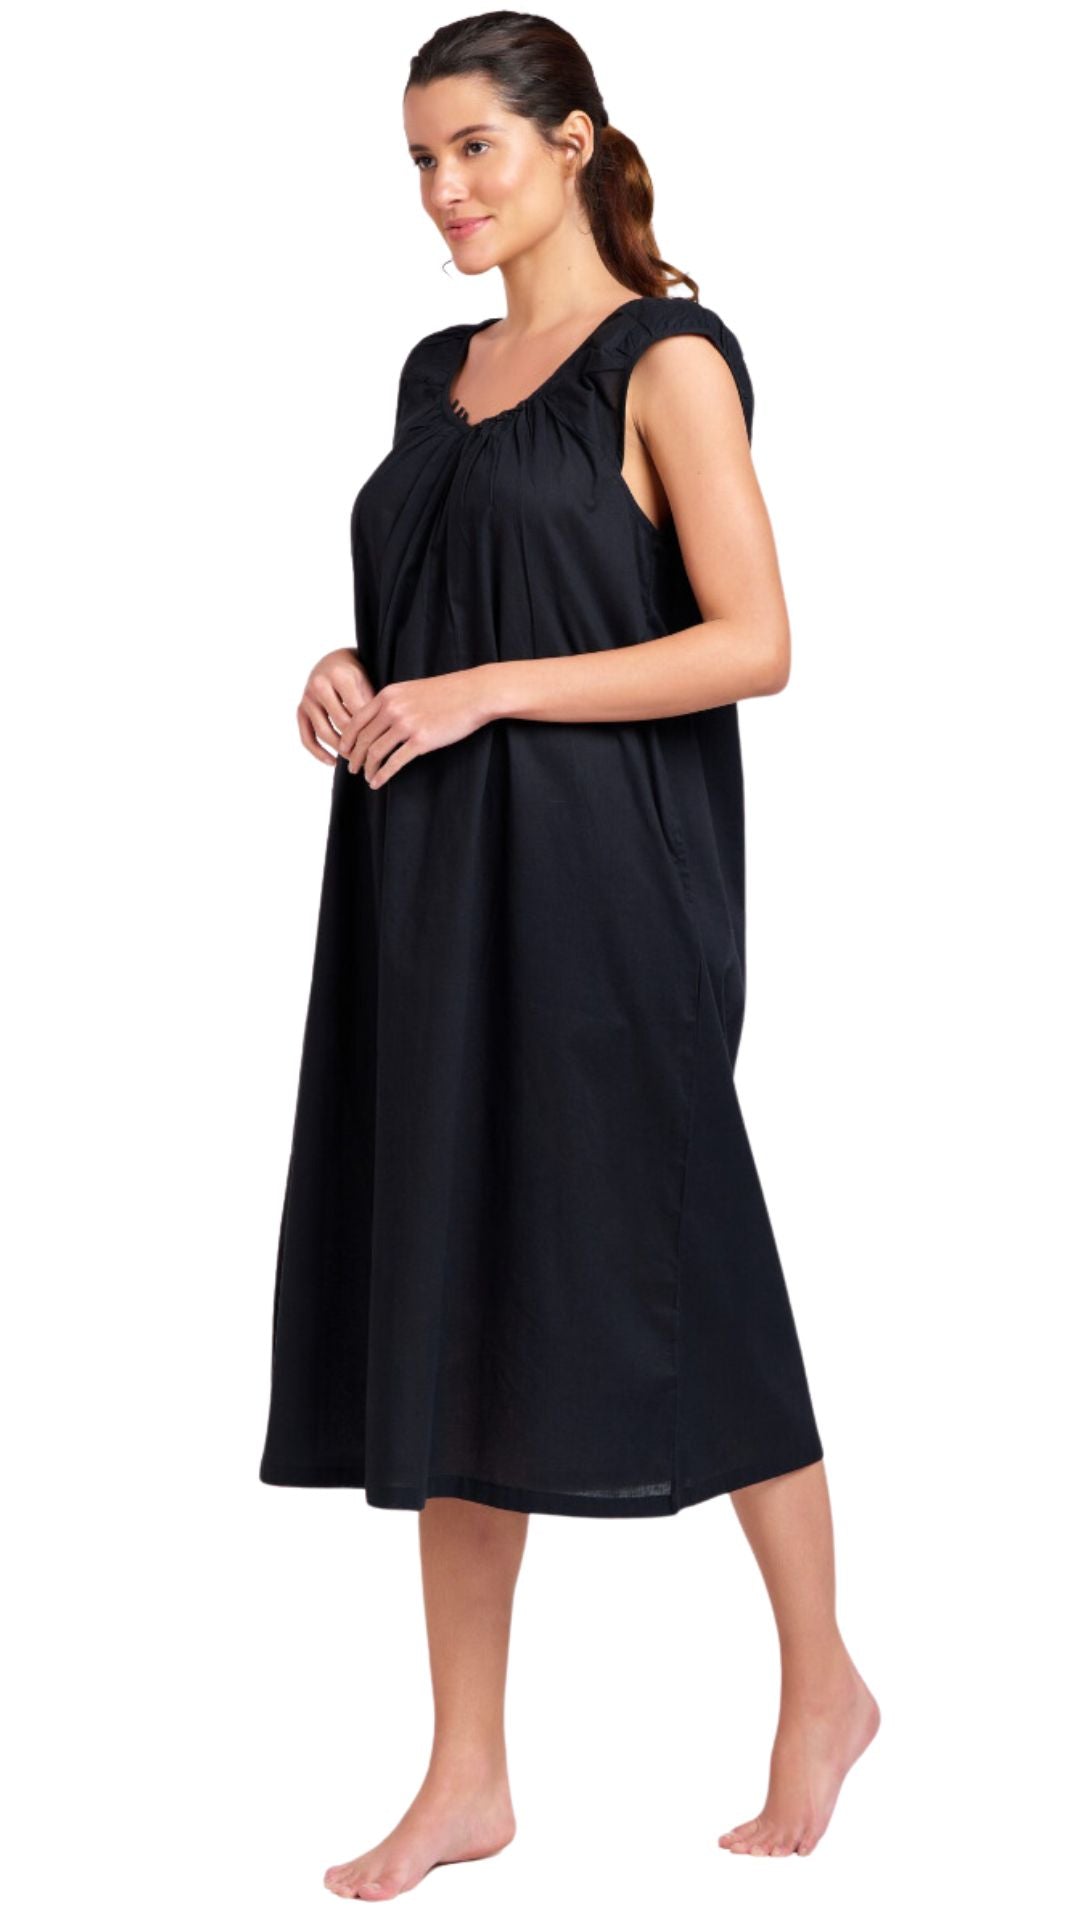 black nightgowns in 100% cotton voile